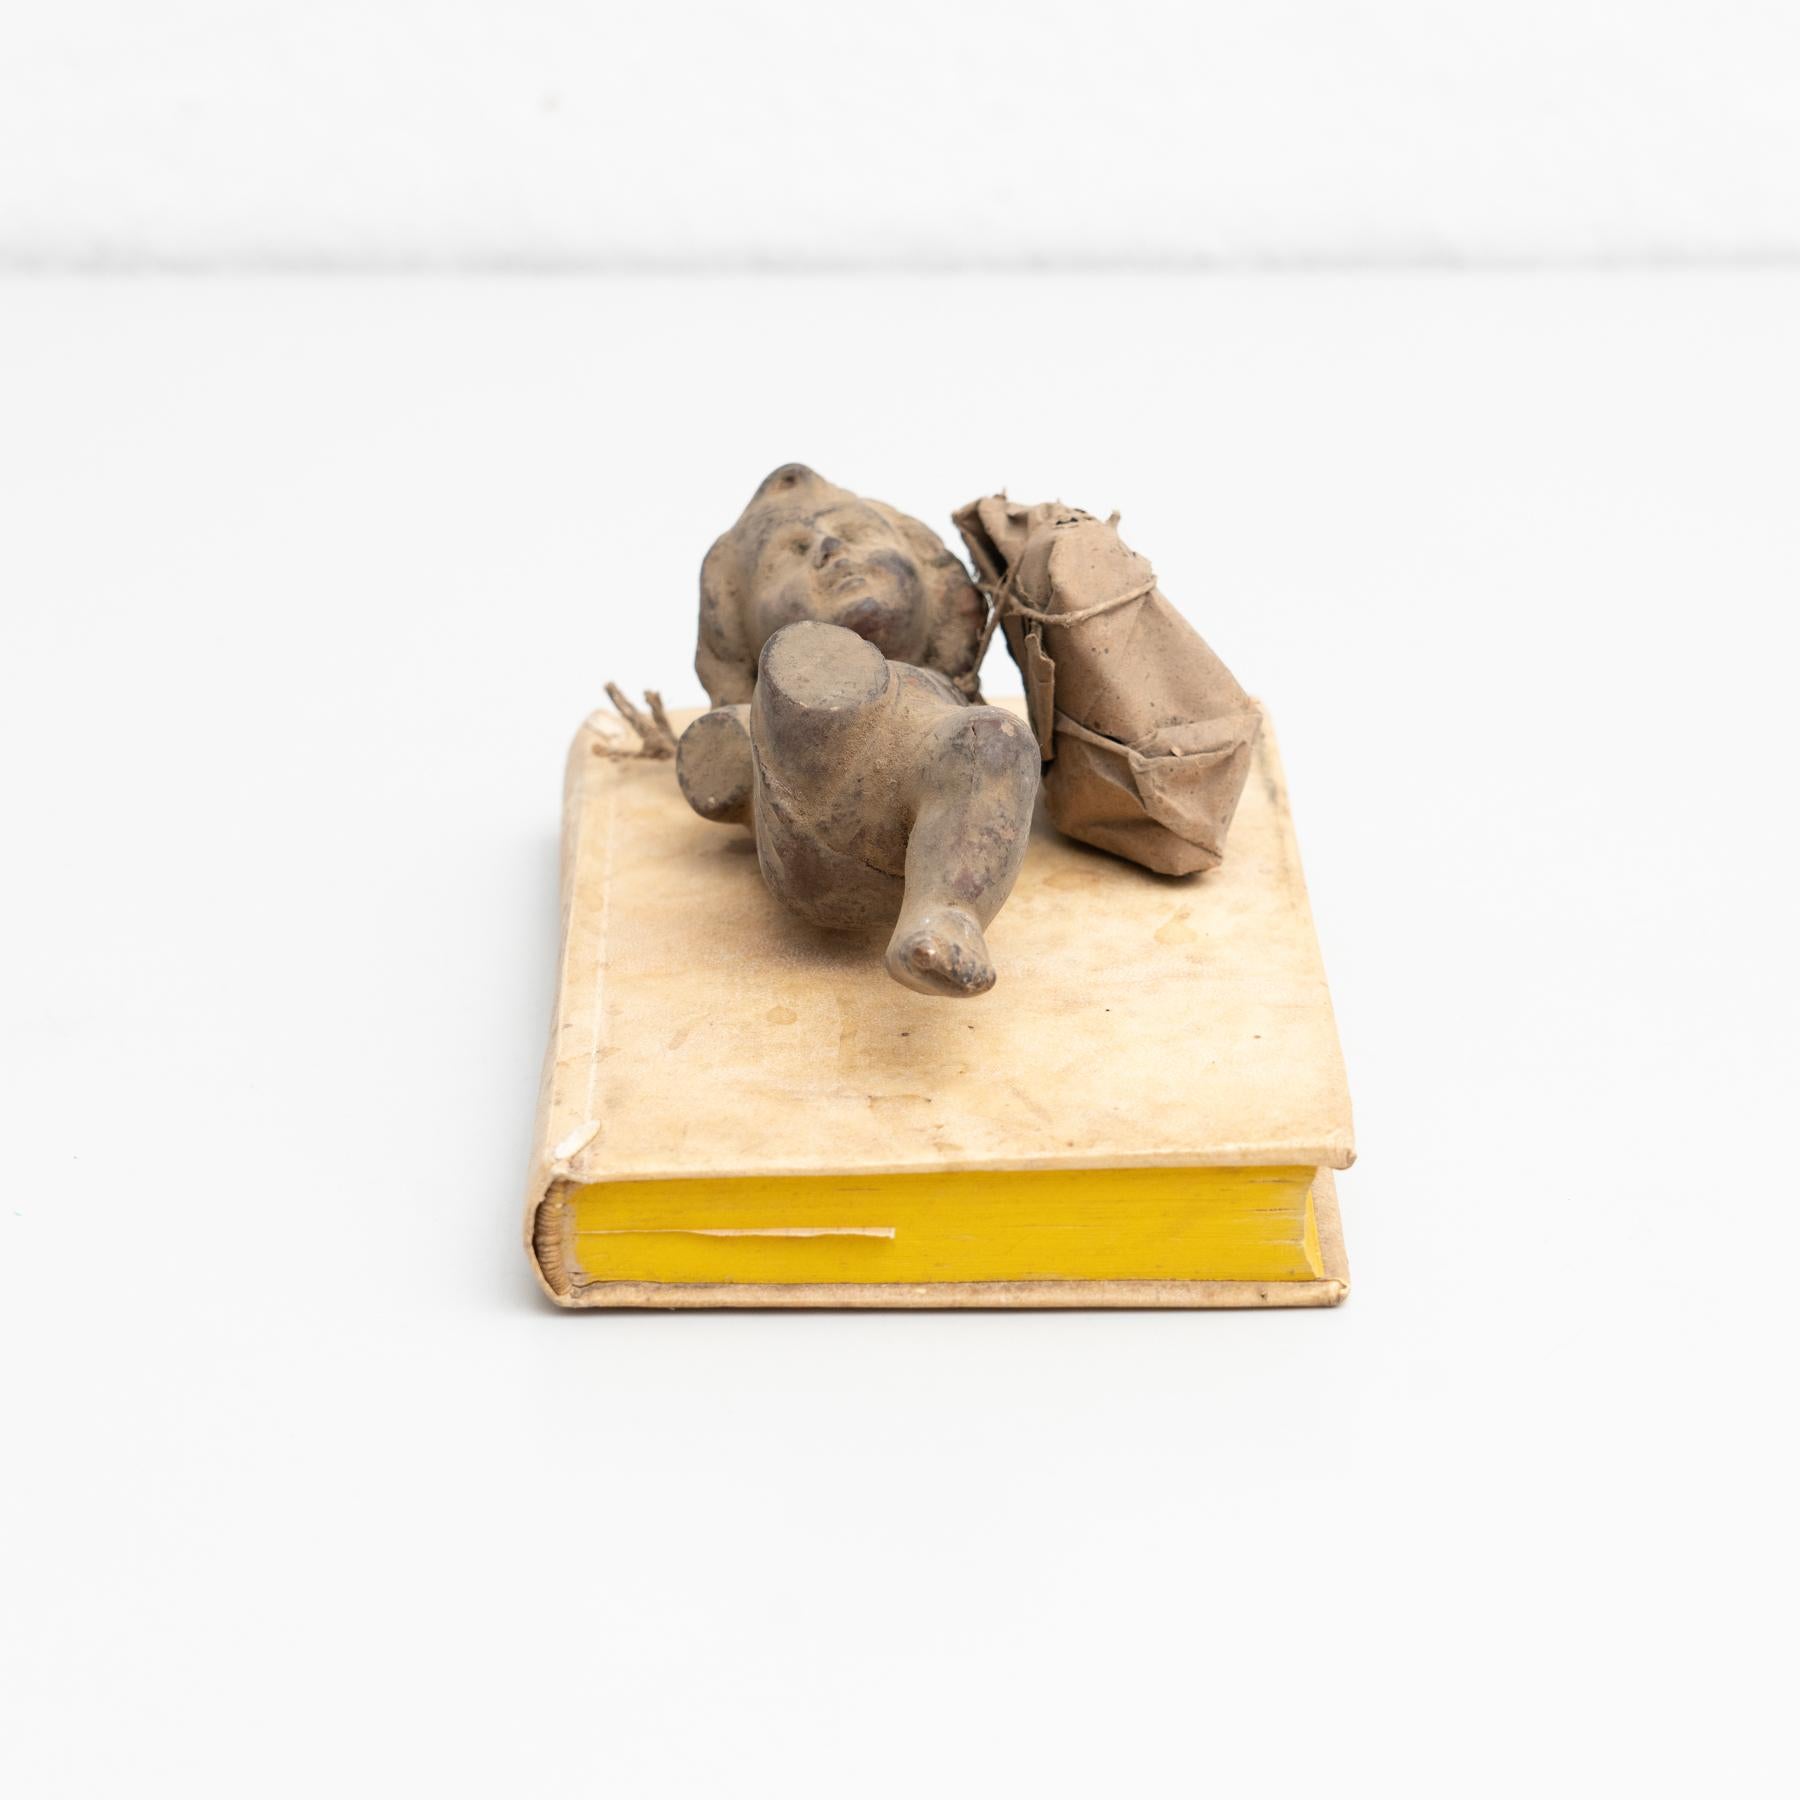 Mid-20th Century Plaster Baby Jesus and Antique Book Sculptural Artwork, circa 1950 For Sale